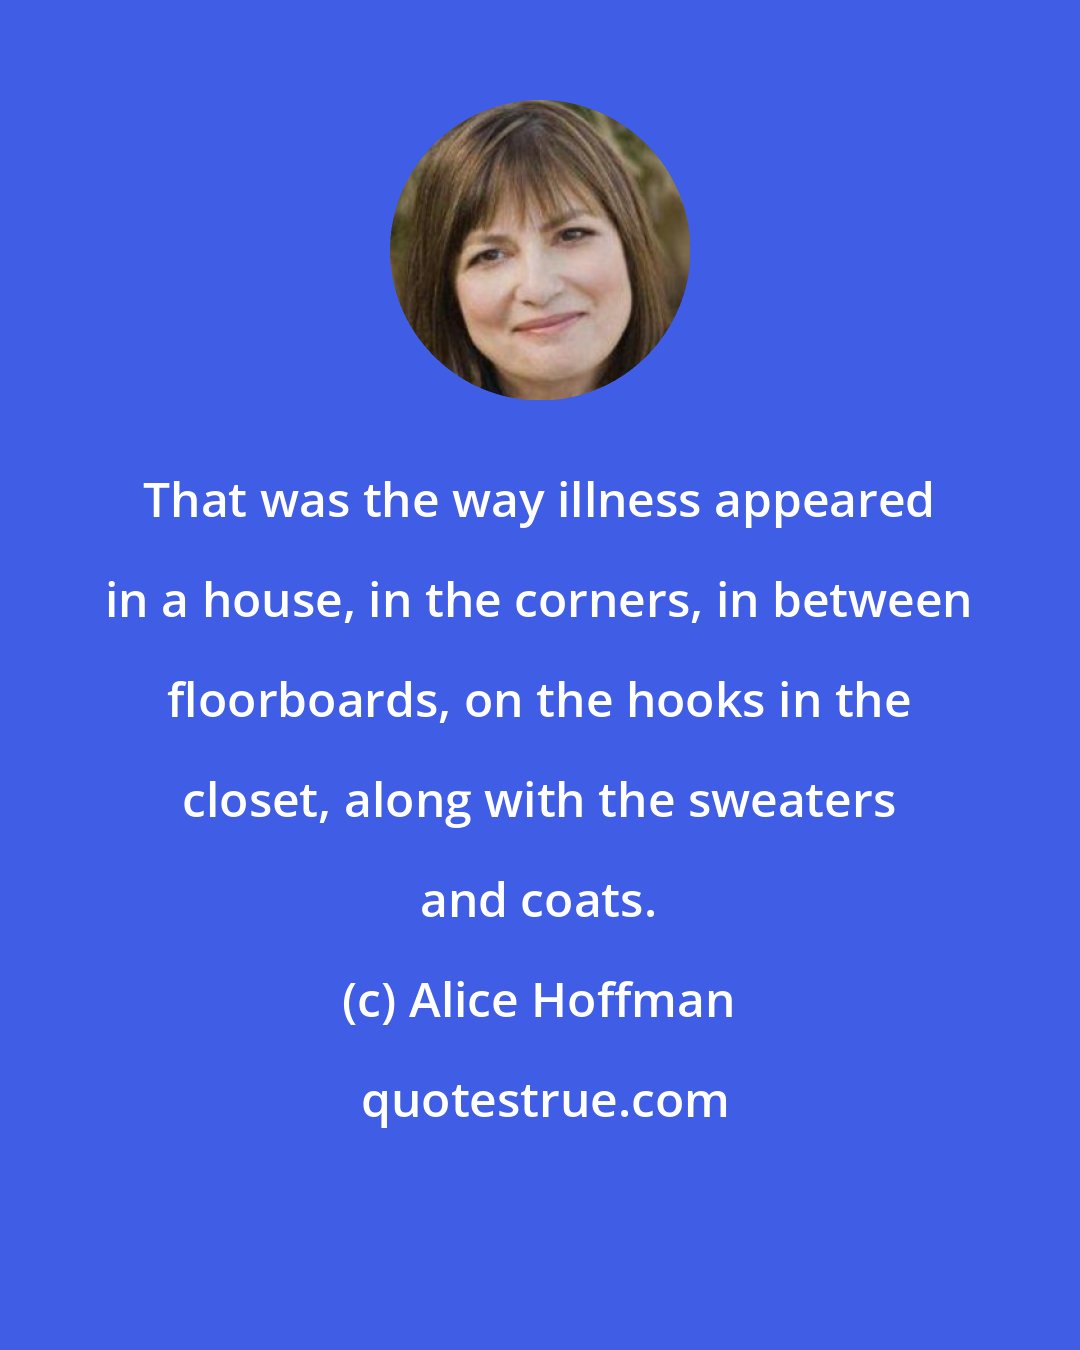 Alice Hoffman: That was the way illness appeared in a house, in the corners, in between floorboards, on the hooks in the closet, along with the sweaters and coats.